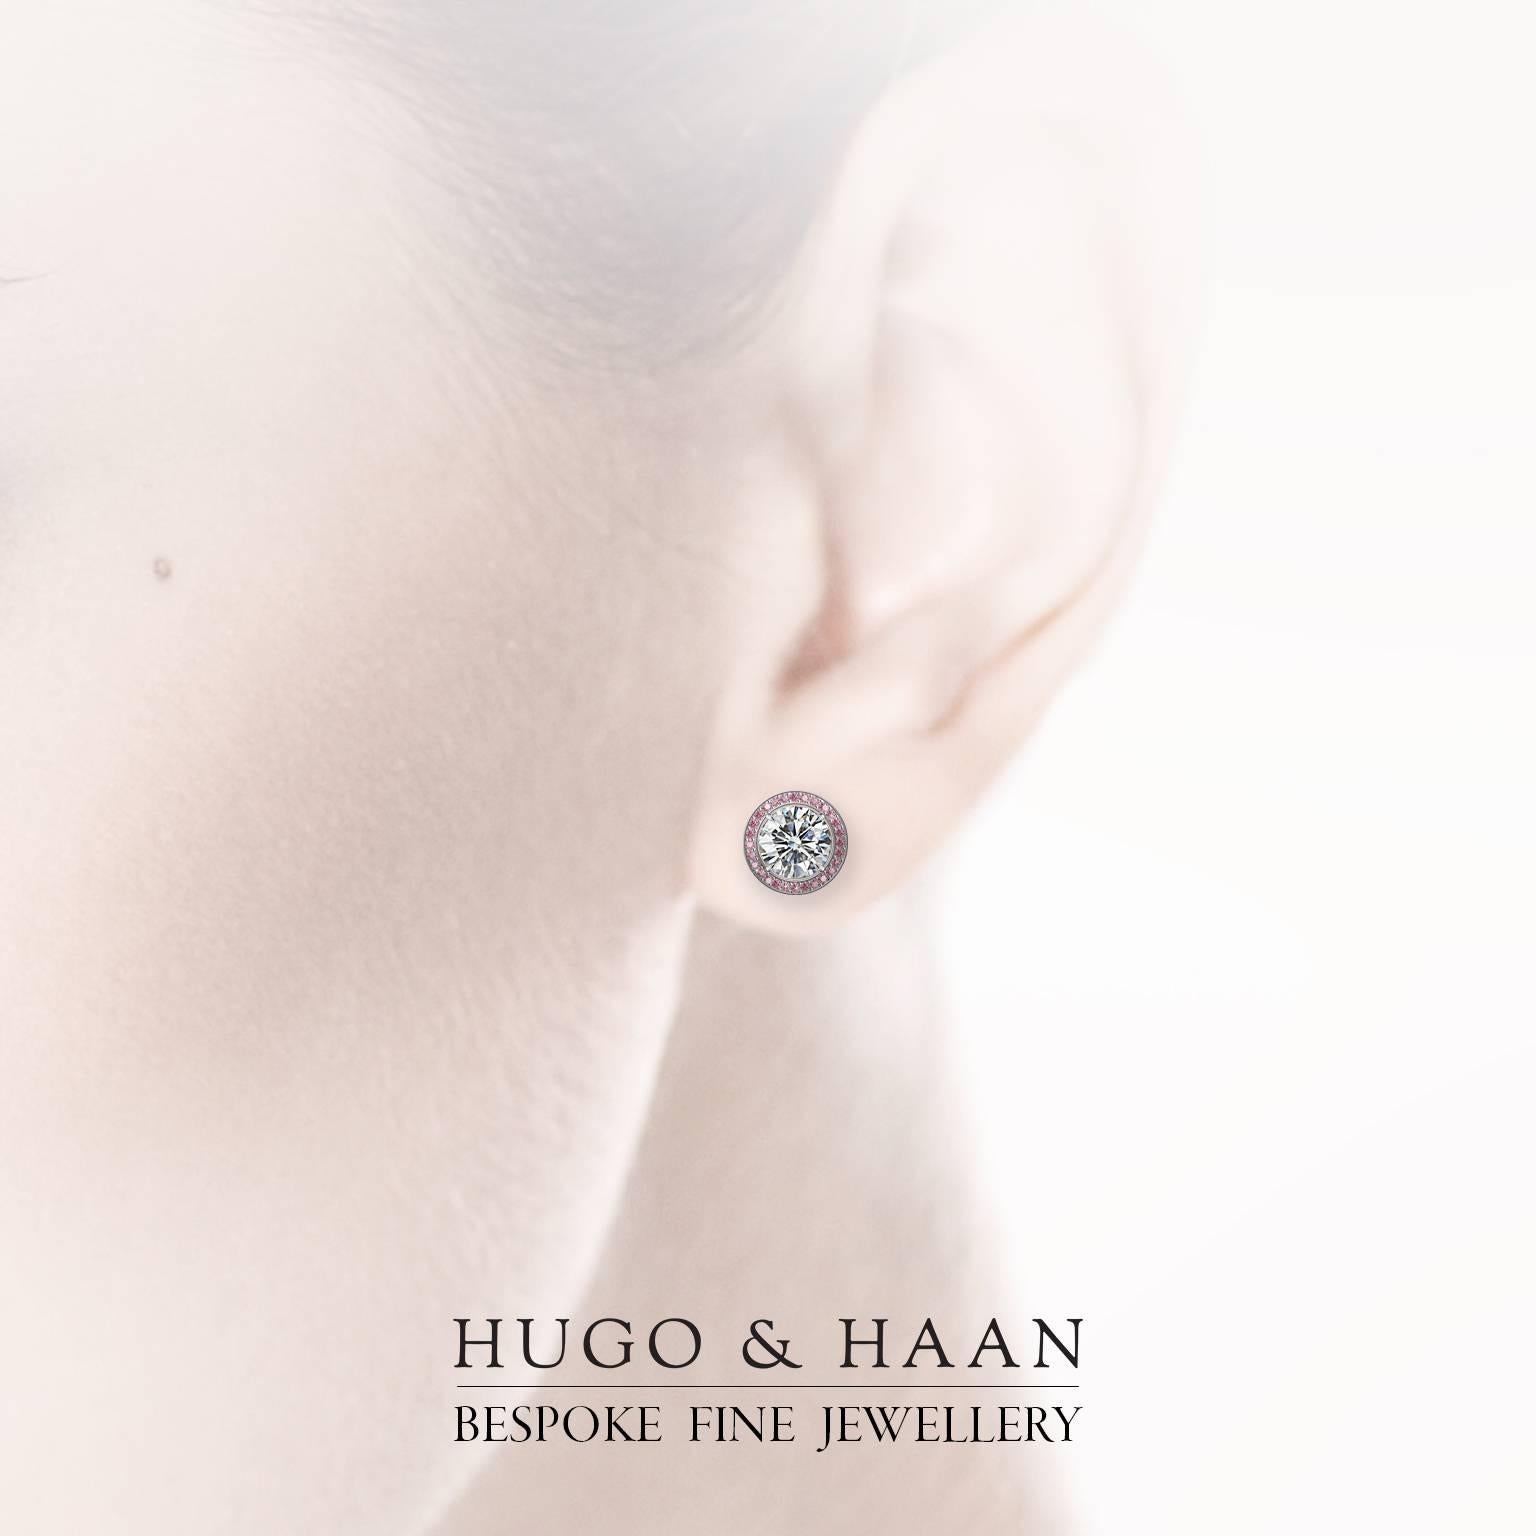 Hugo & Haan GIA Certified Platinum White Diamond and Pink Sapphire Stud Earrings In New Condition For Sale In London, GB